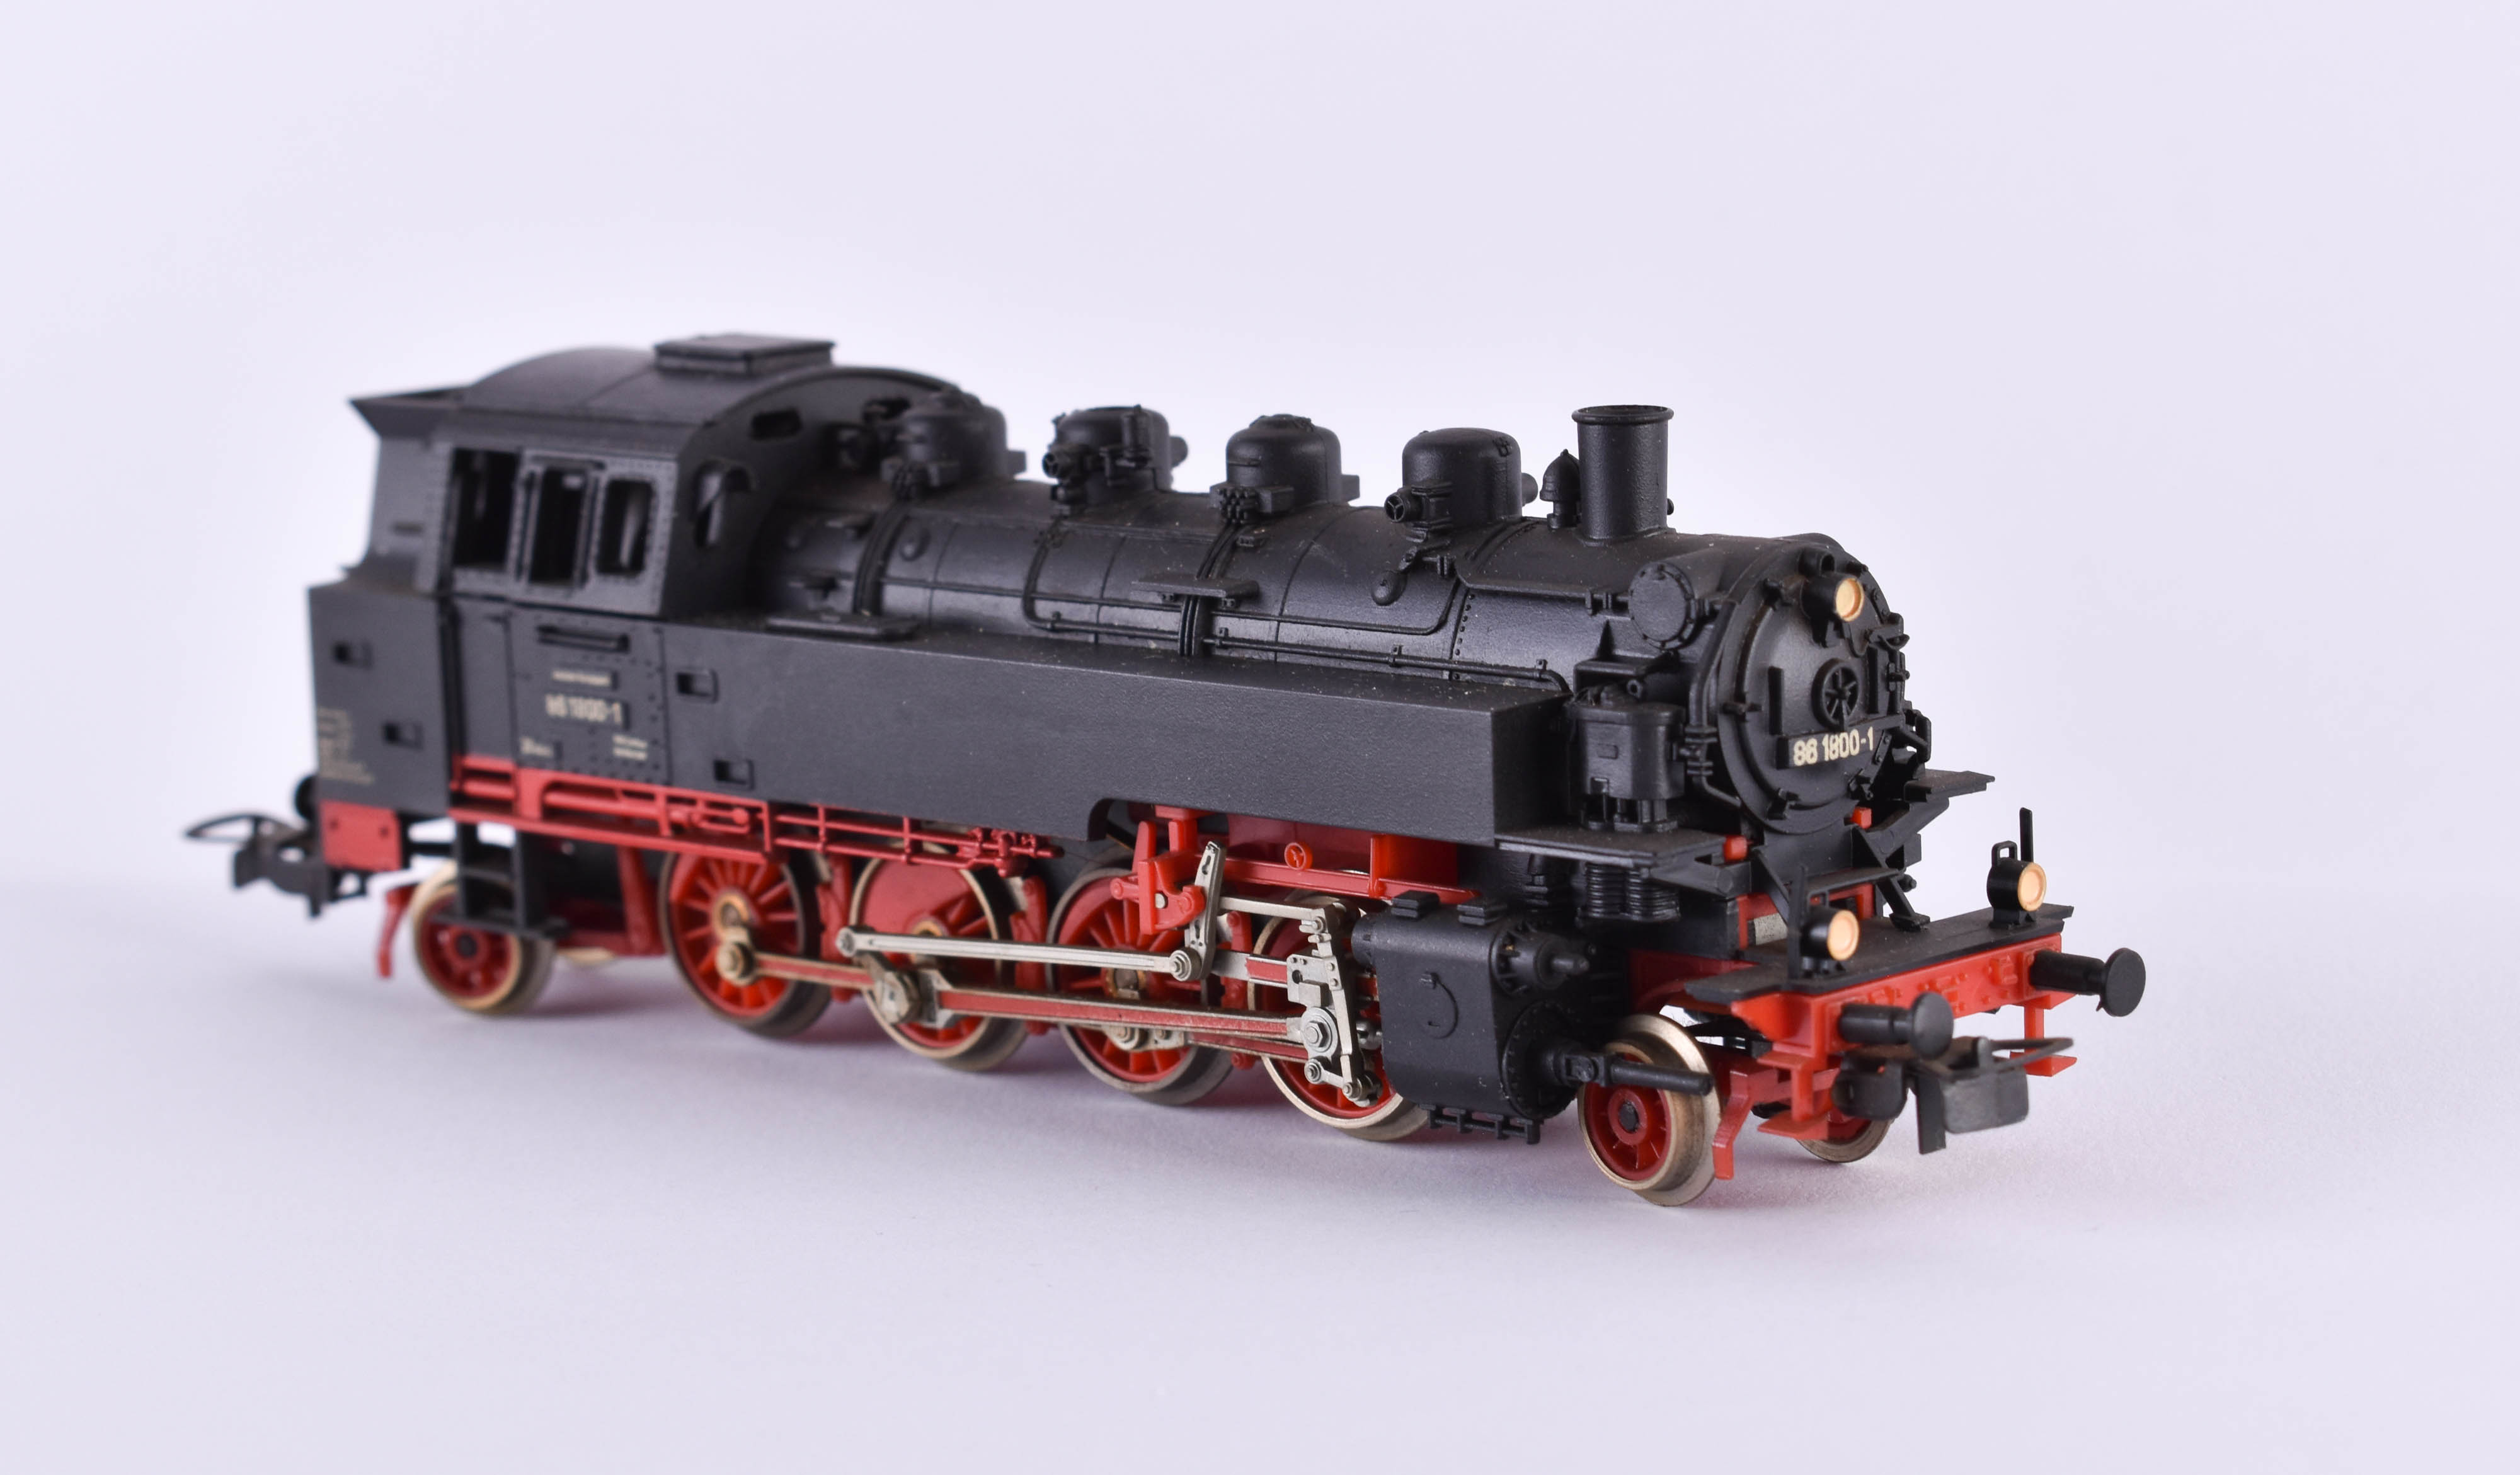 Steam locomotive Br 86 1800-1, DR, Piko - Image 2 of 3